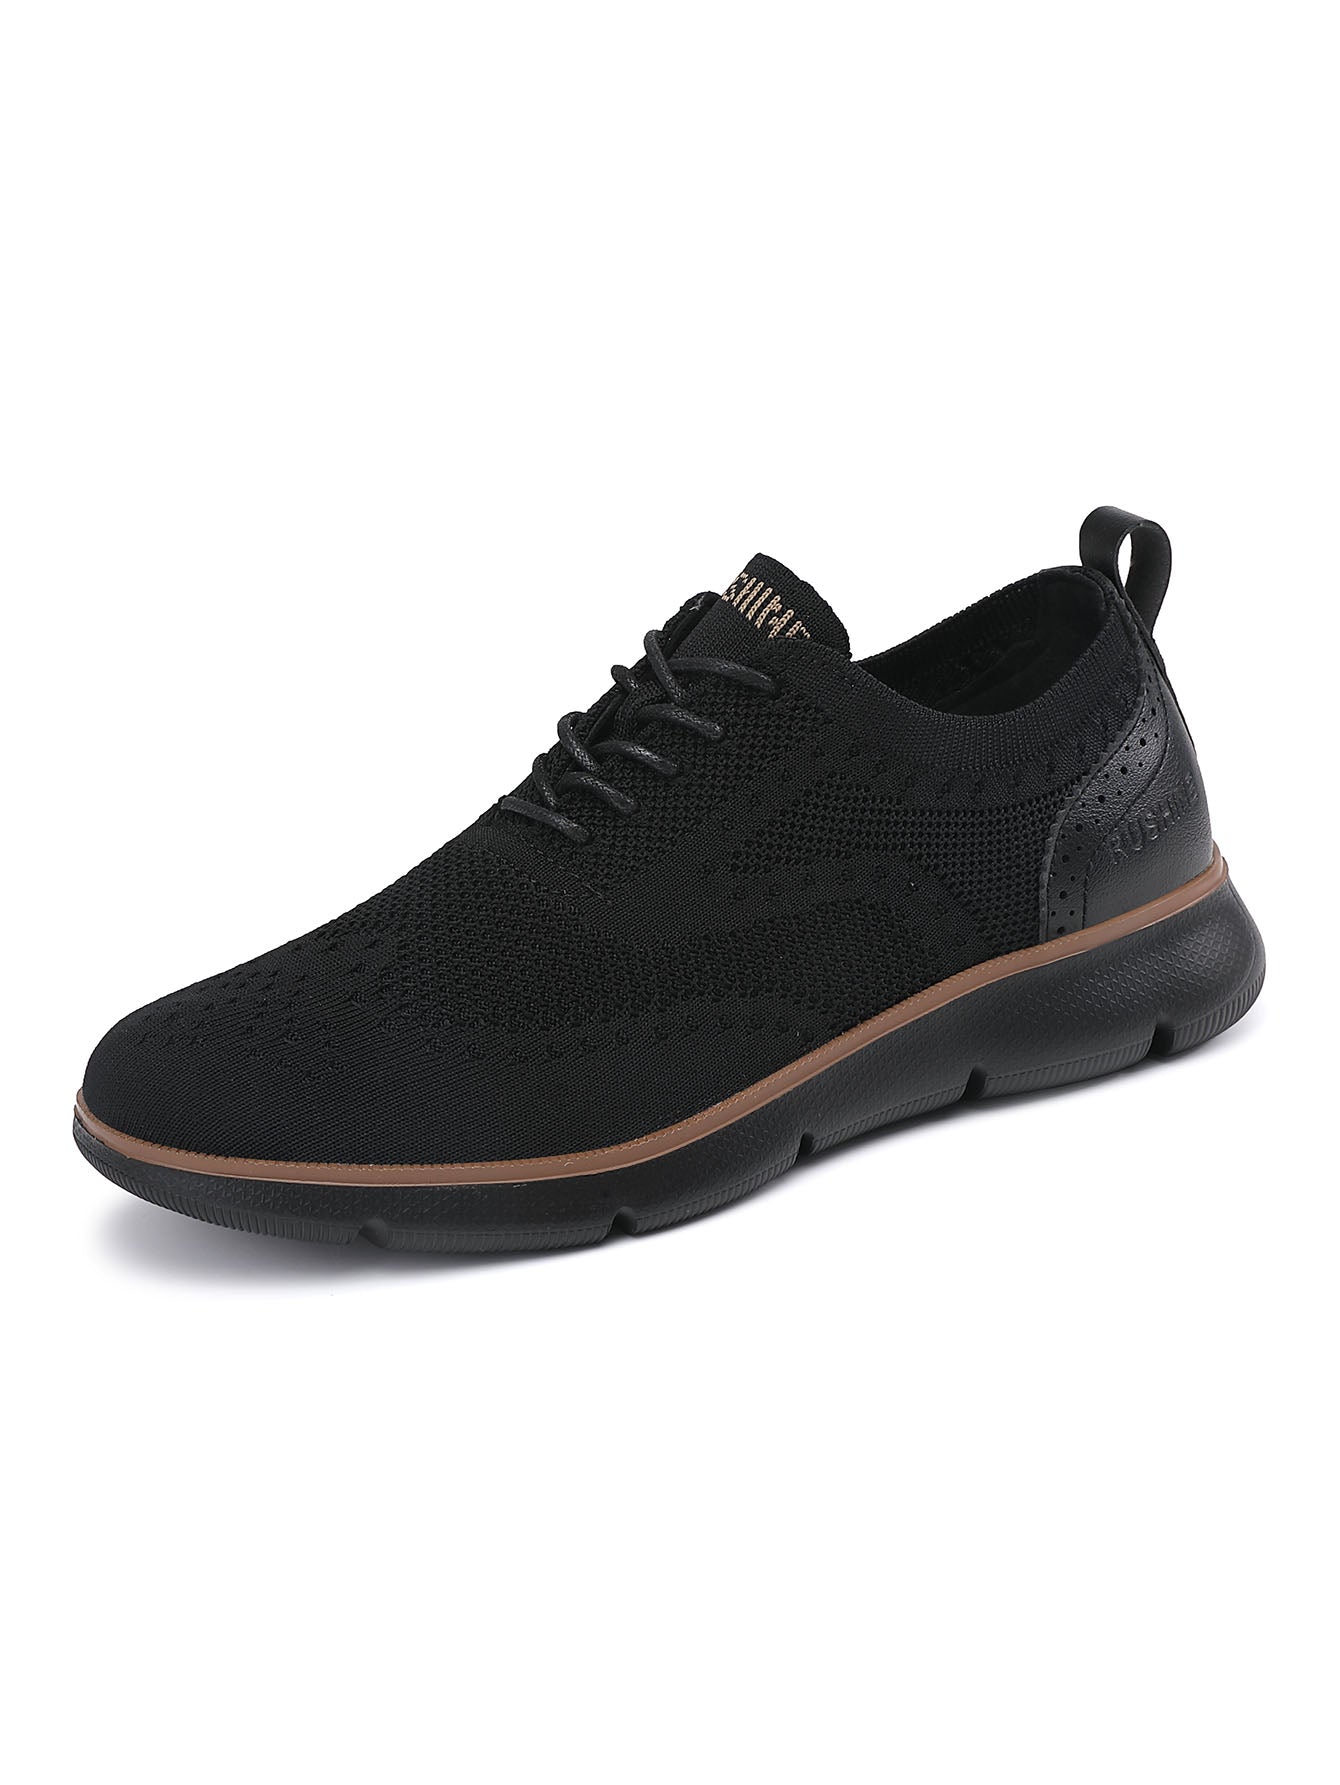 Men's lace Up Casual Shoes Oxford Knitted Lightweight Comfo Vilocy